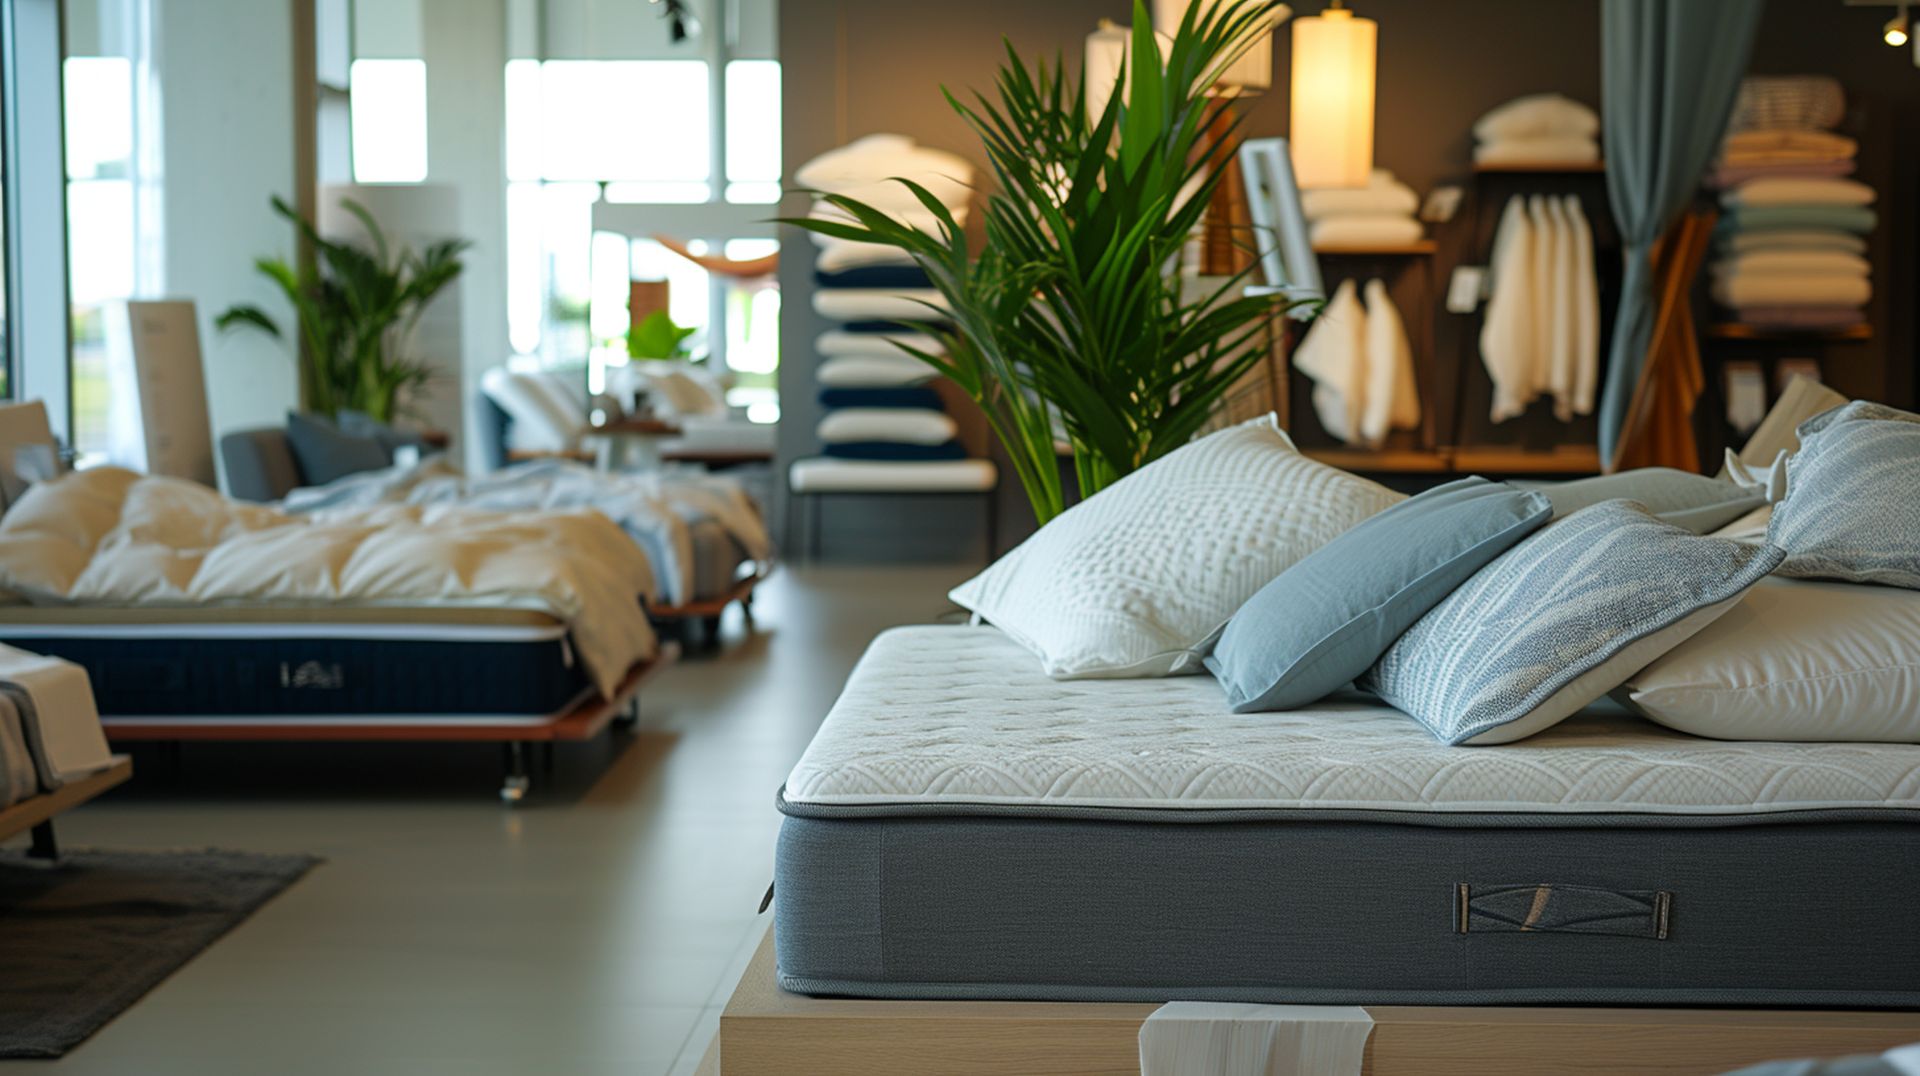 If you're looking for a new bed, mattress stores in Murdock offer the best customer and delivery service, financing, and warranties in Florida